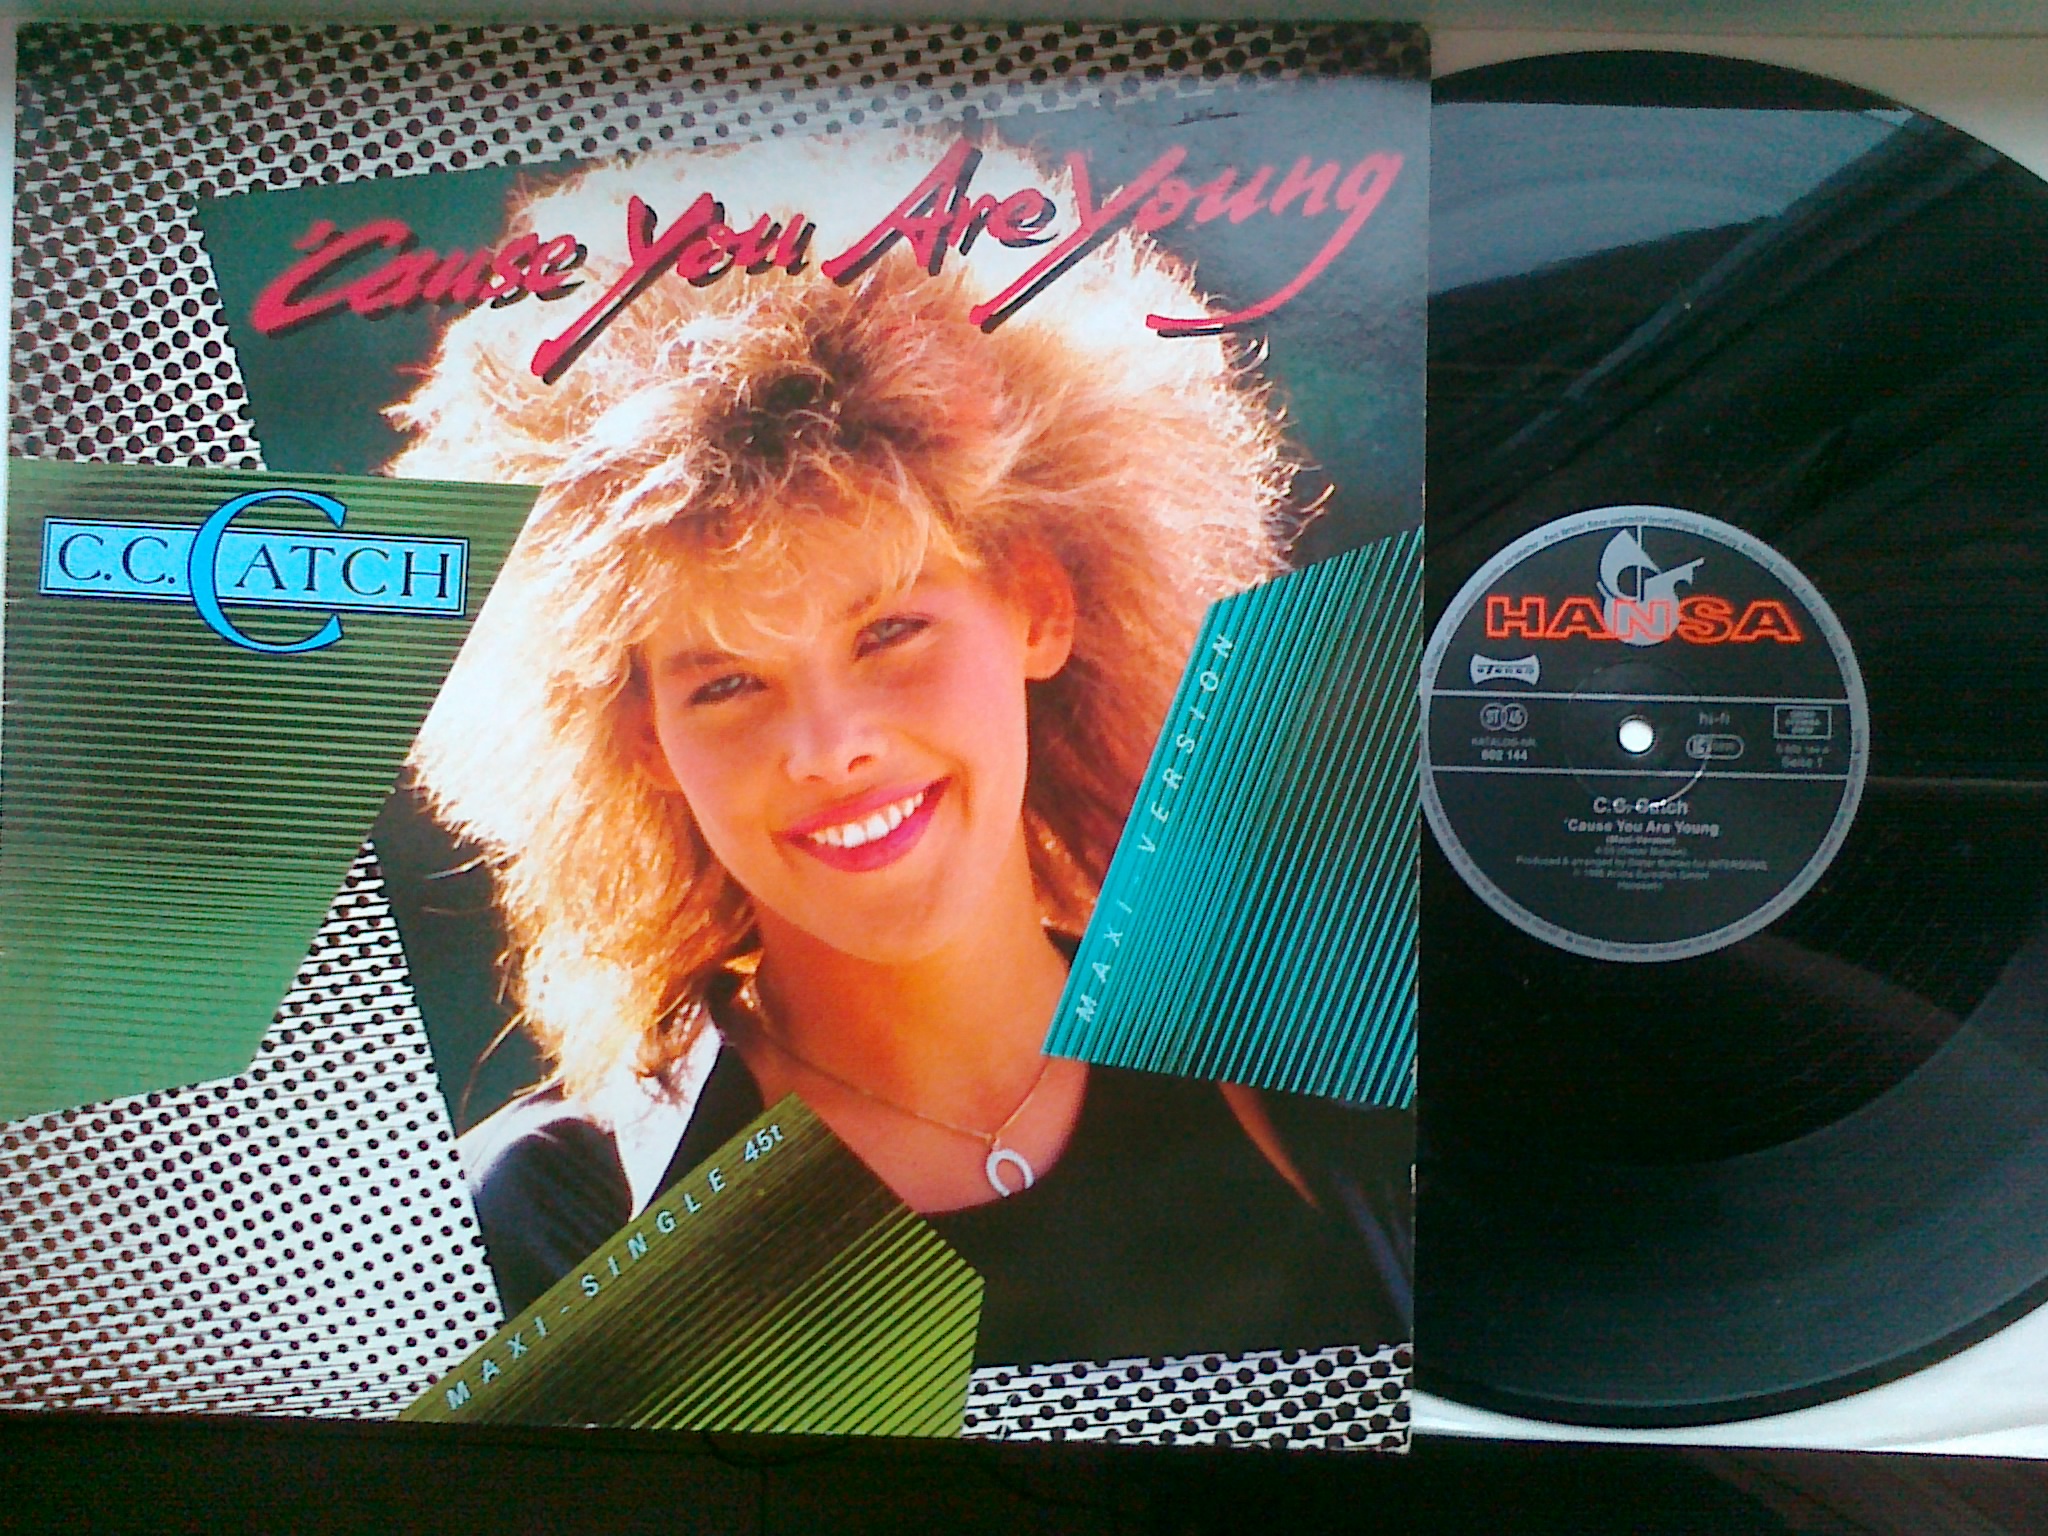 C. C. Catch - 'Cause You Are Young